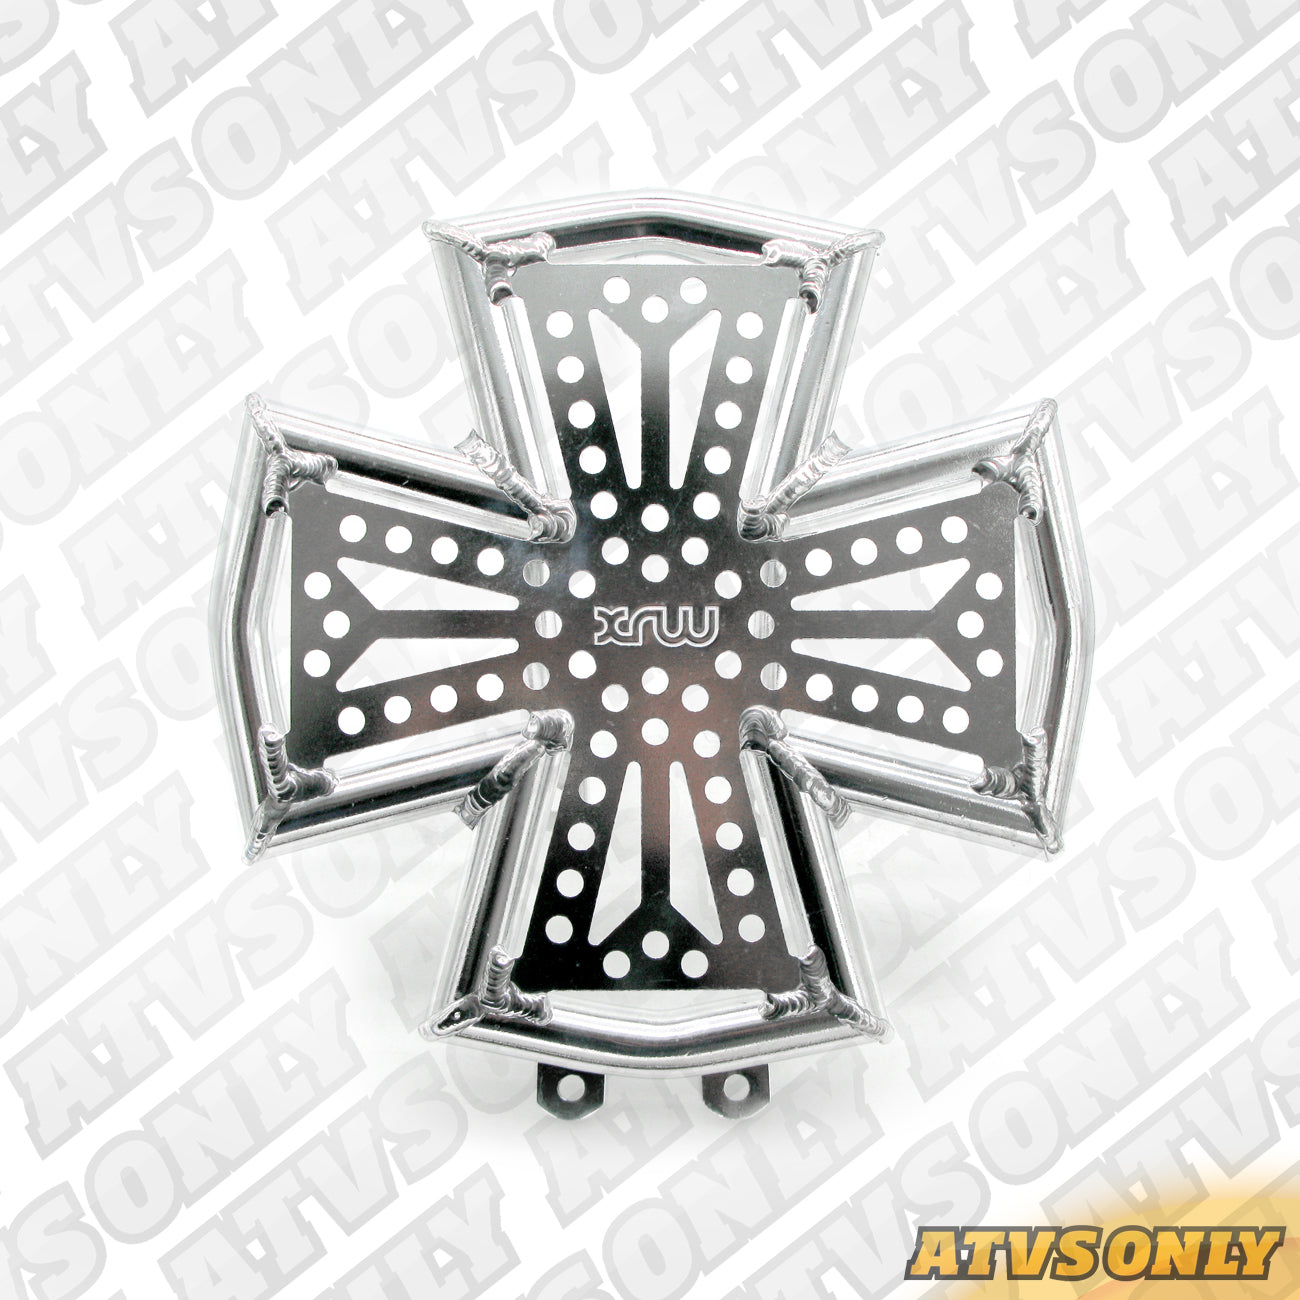 Bumpers - Front X7 Maltese Cross (Alloy) for Yamaha Applications